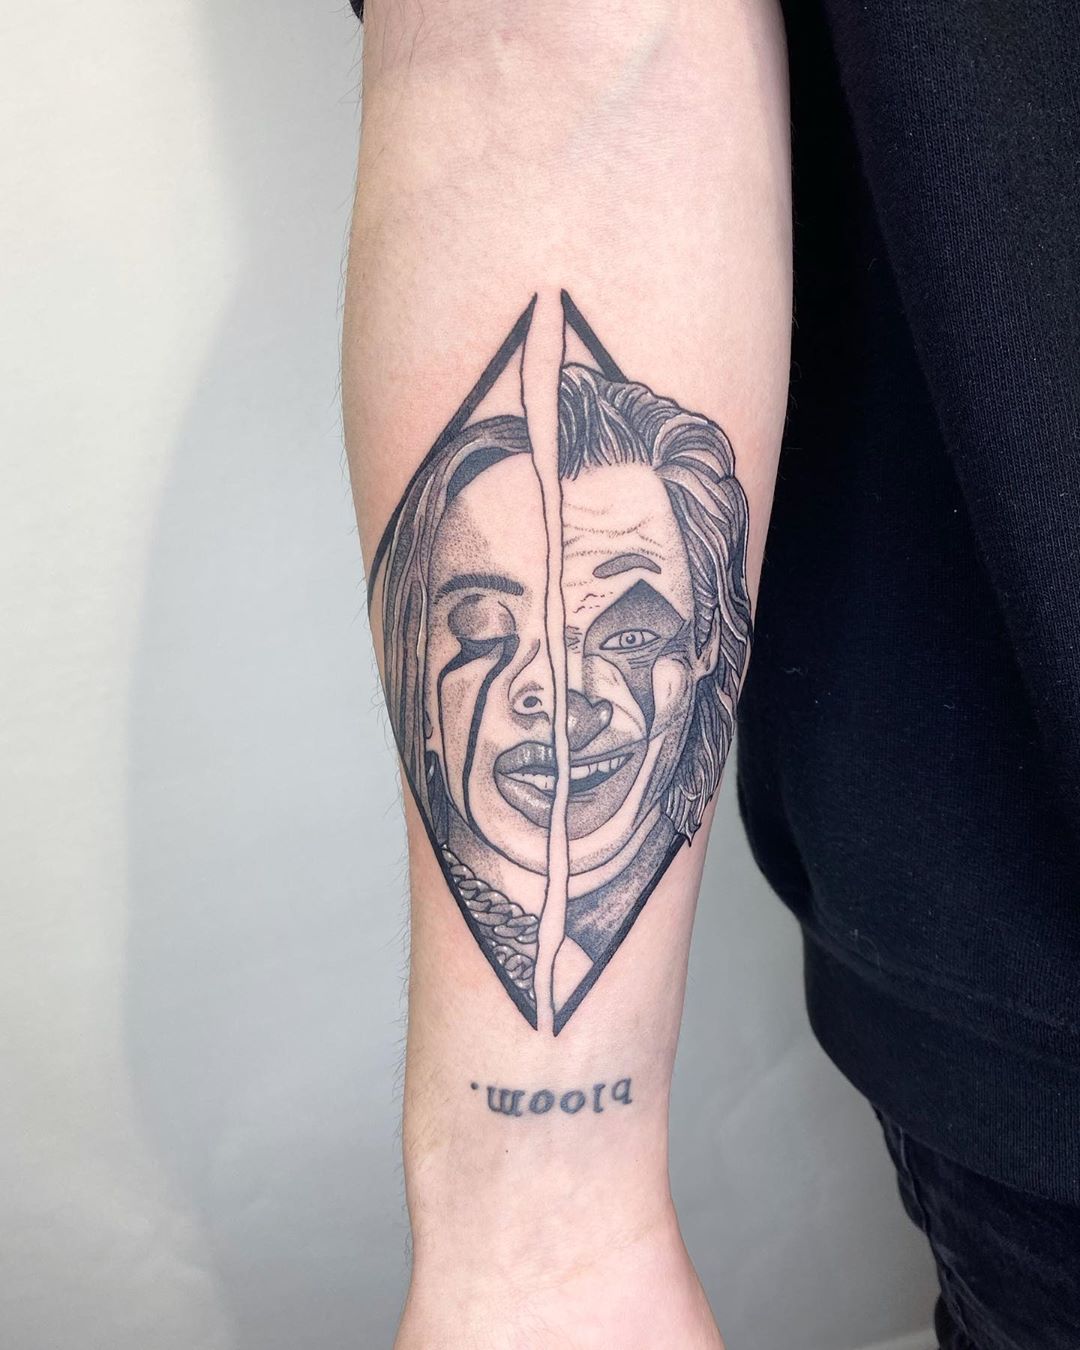 Billie Eilish tattoo - Color style by MIA CAT